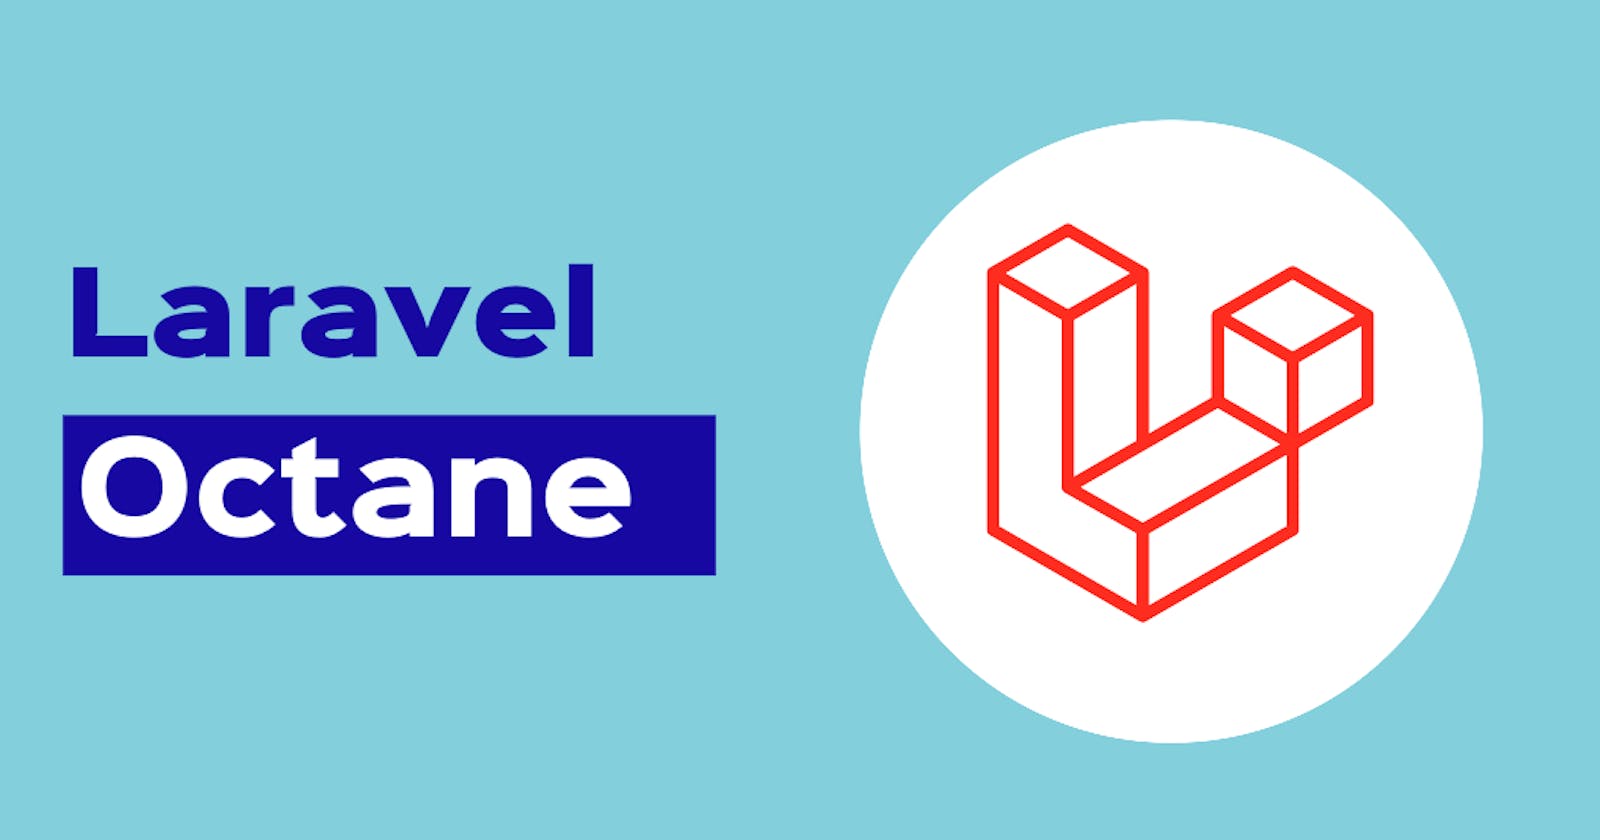 What is Laravel Octane? How to use it with Laravel?